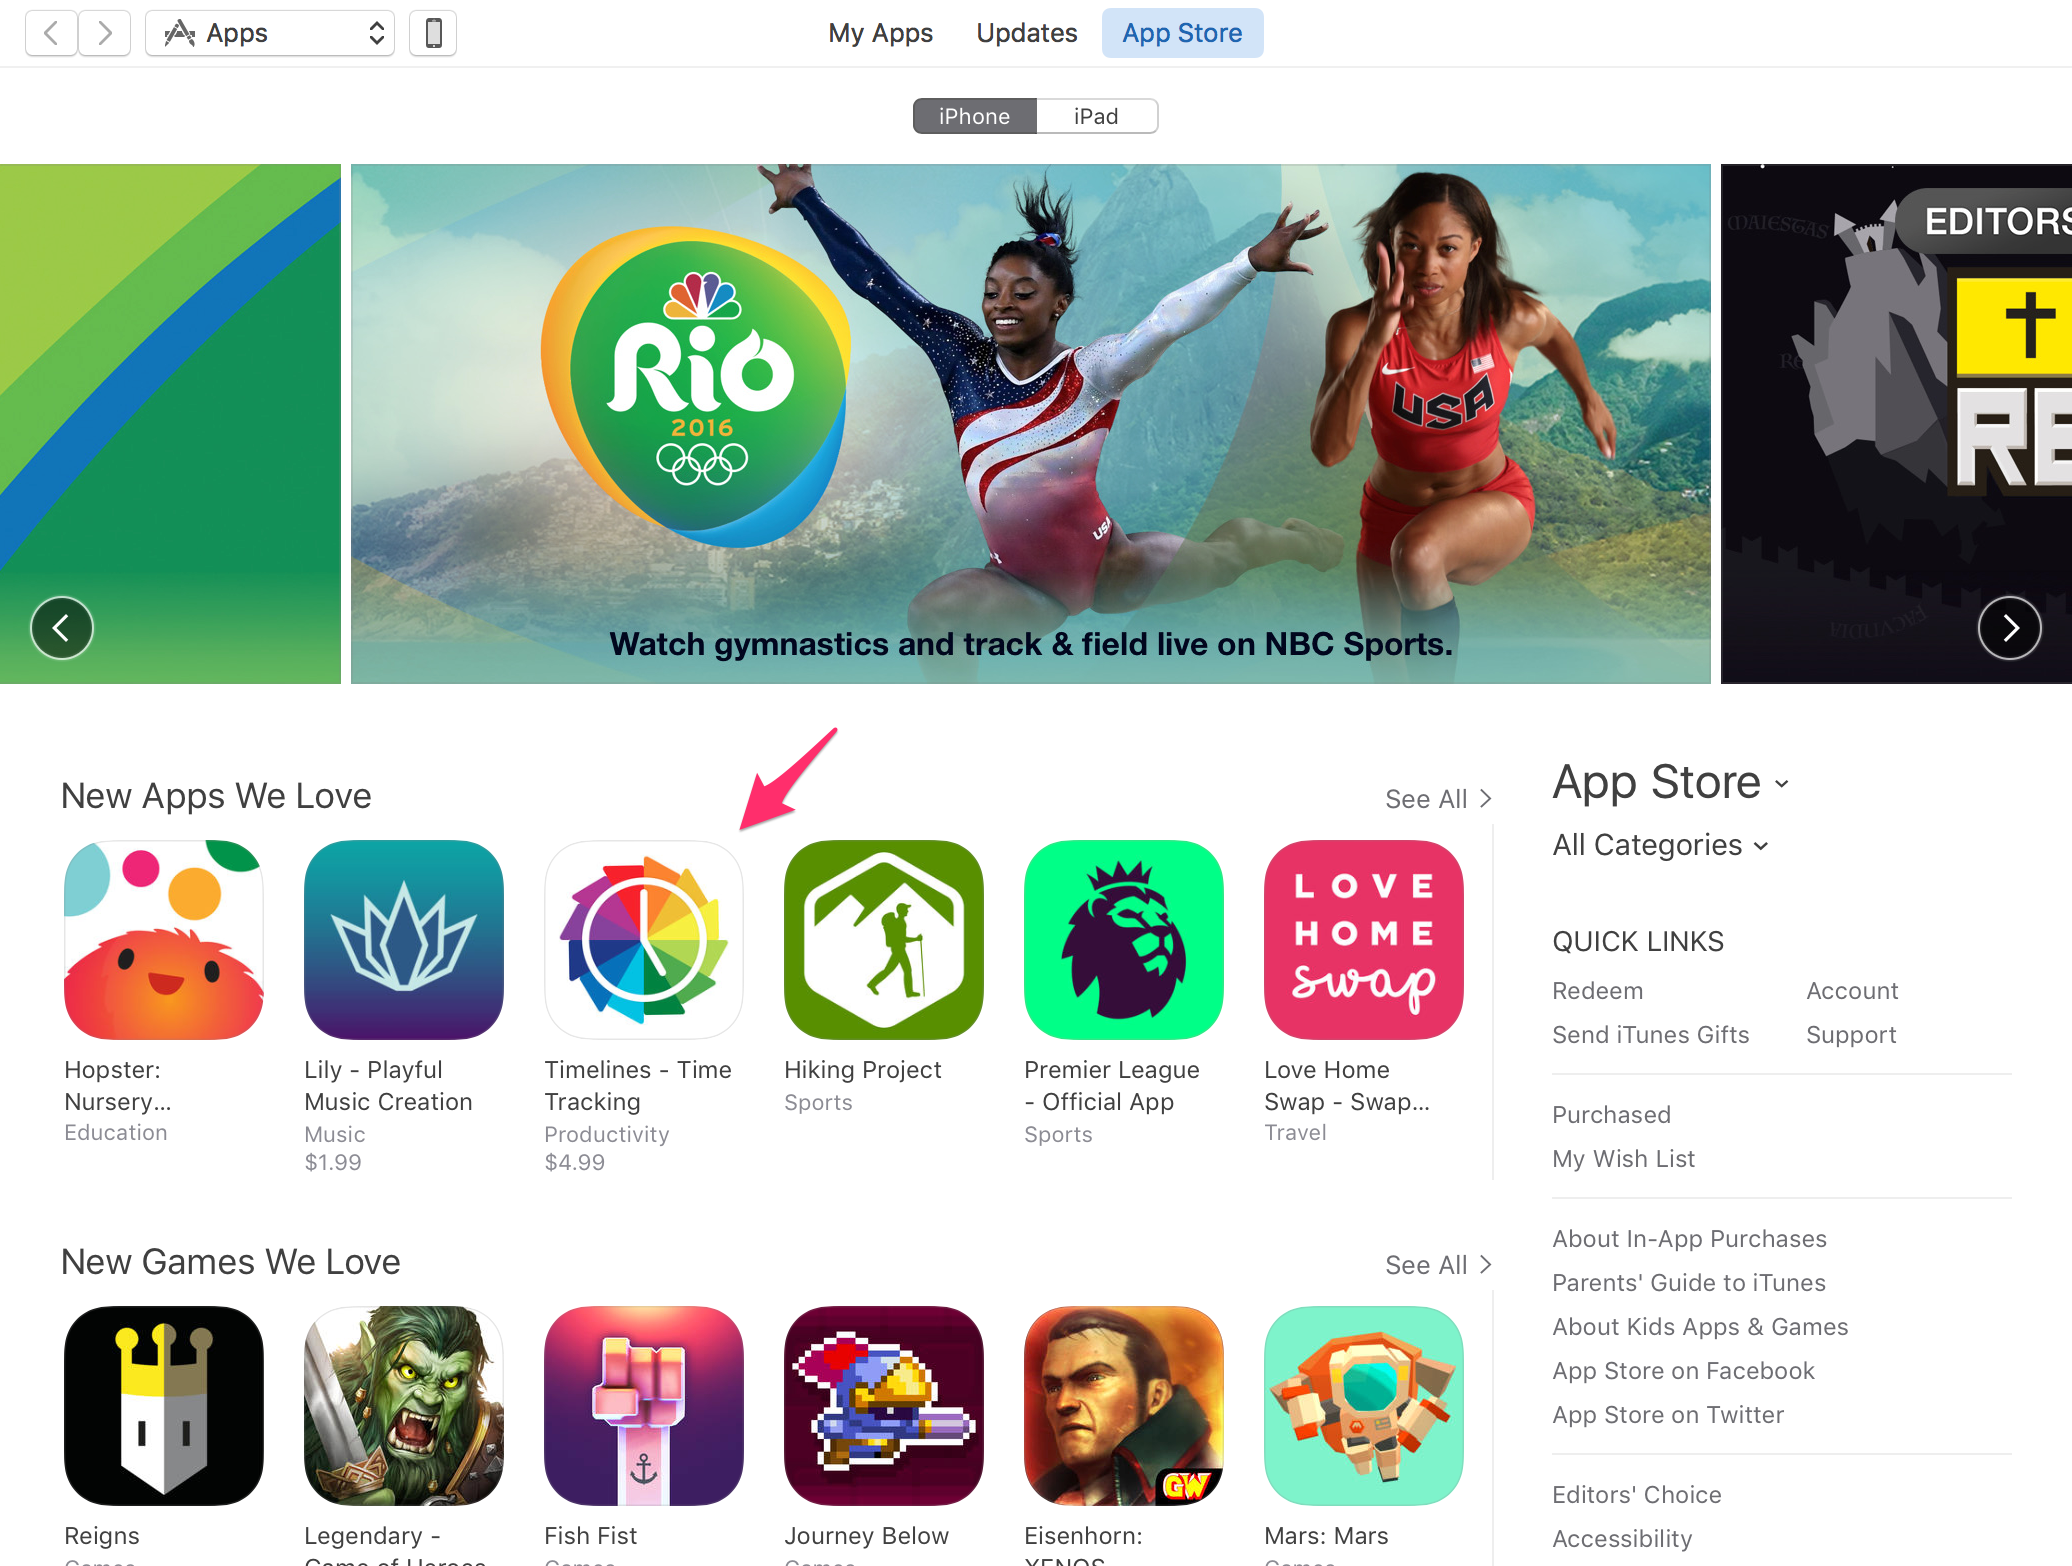 Timelines featured on the App Store